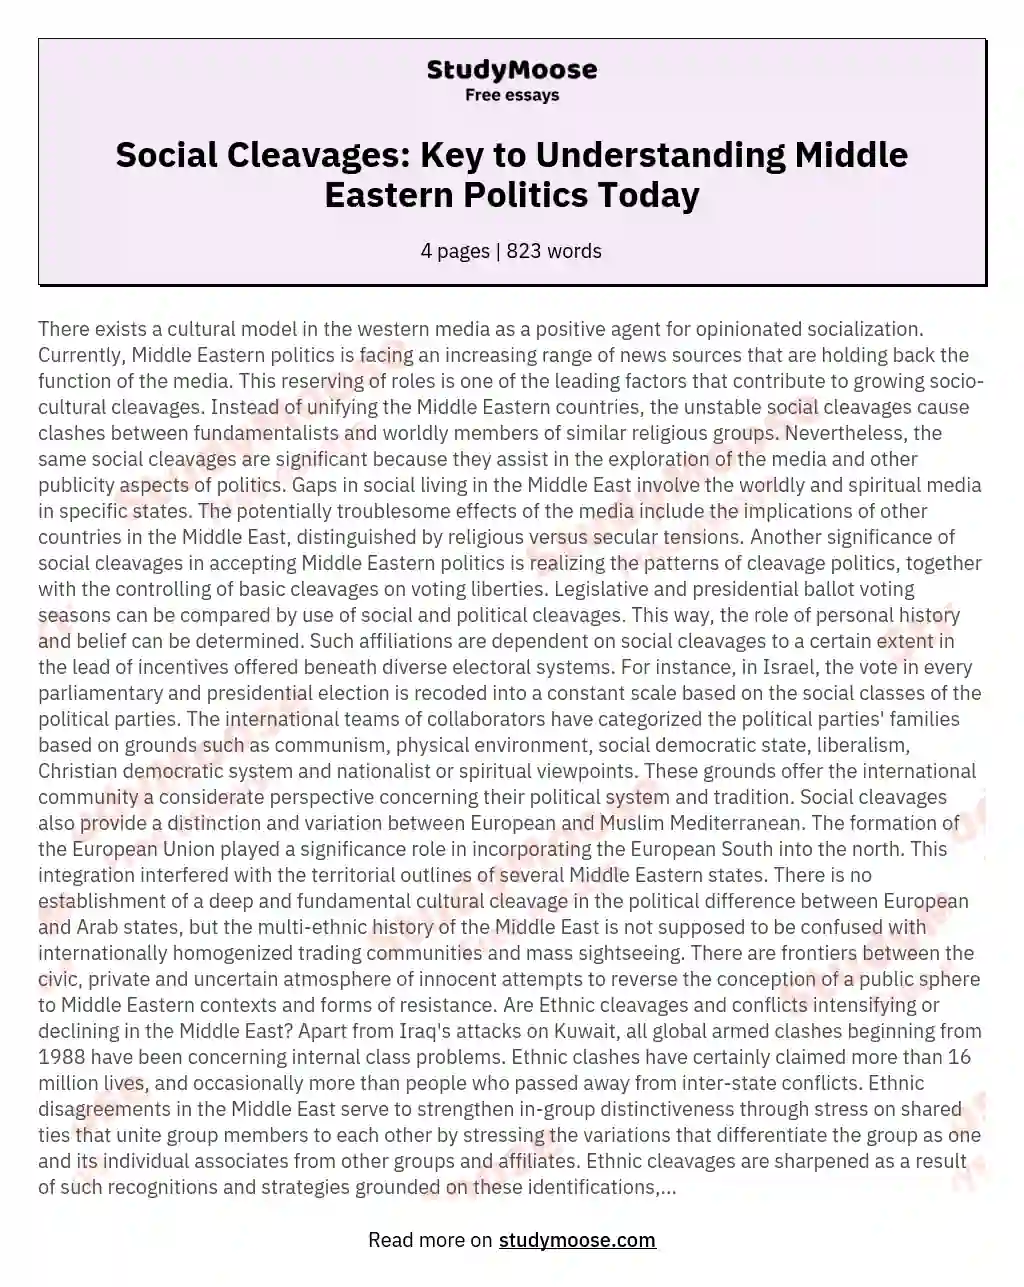 Social Cleavages: Key to Understanding Middle Eastern Politics Today essay